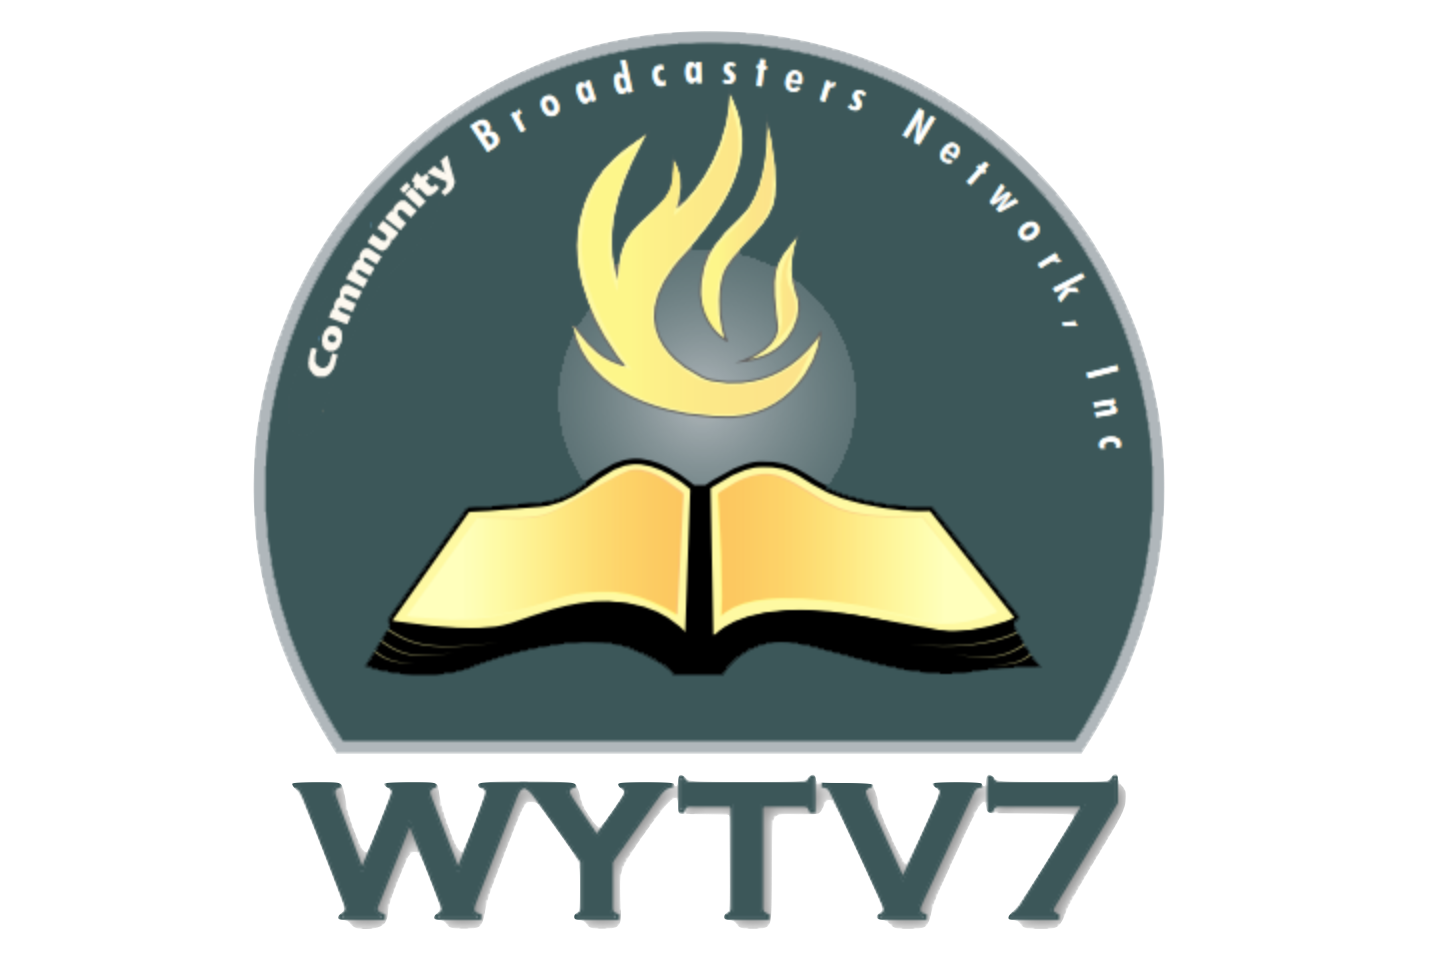 WYTV7 Christian Broadcasters Network, Inc Logo